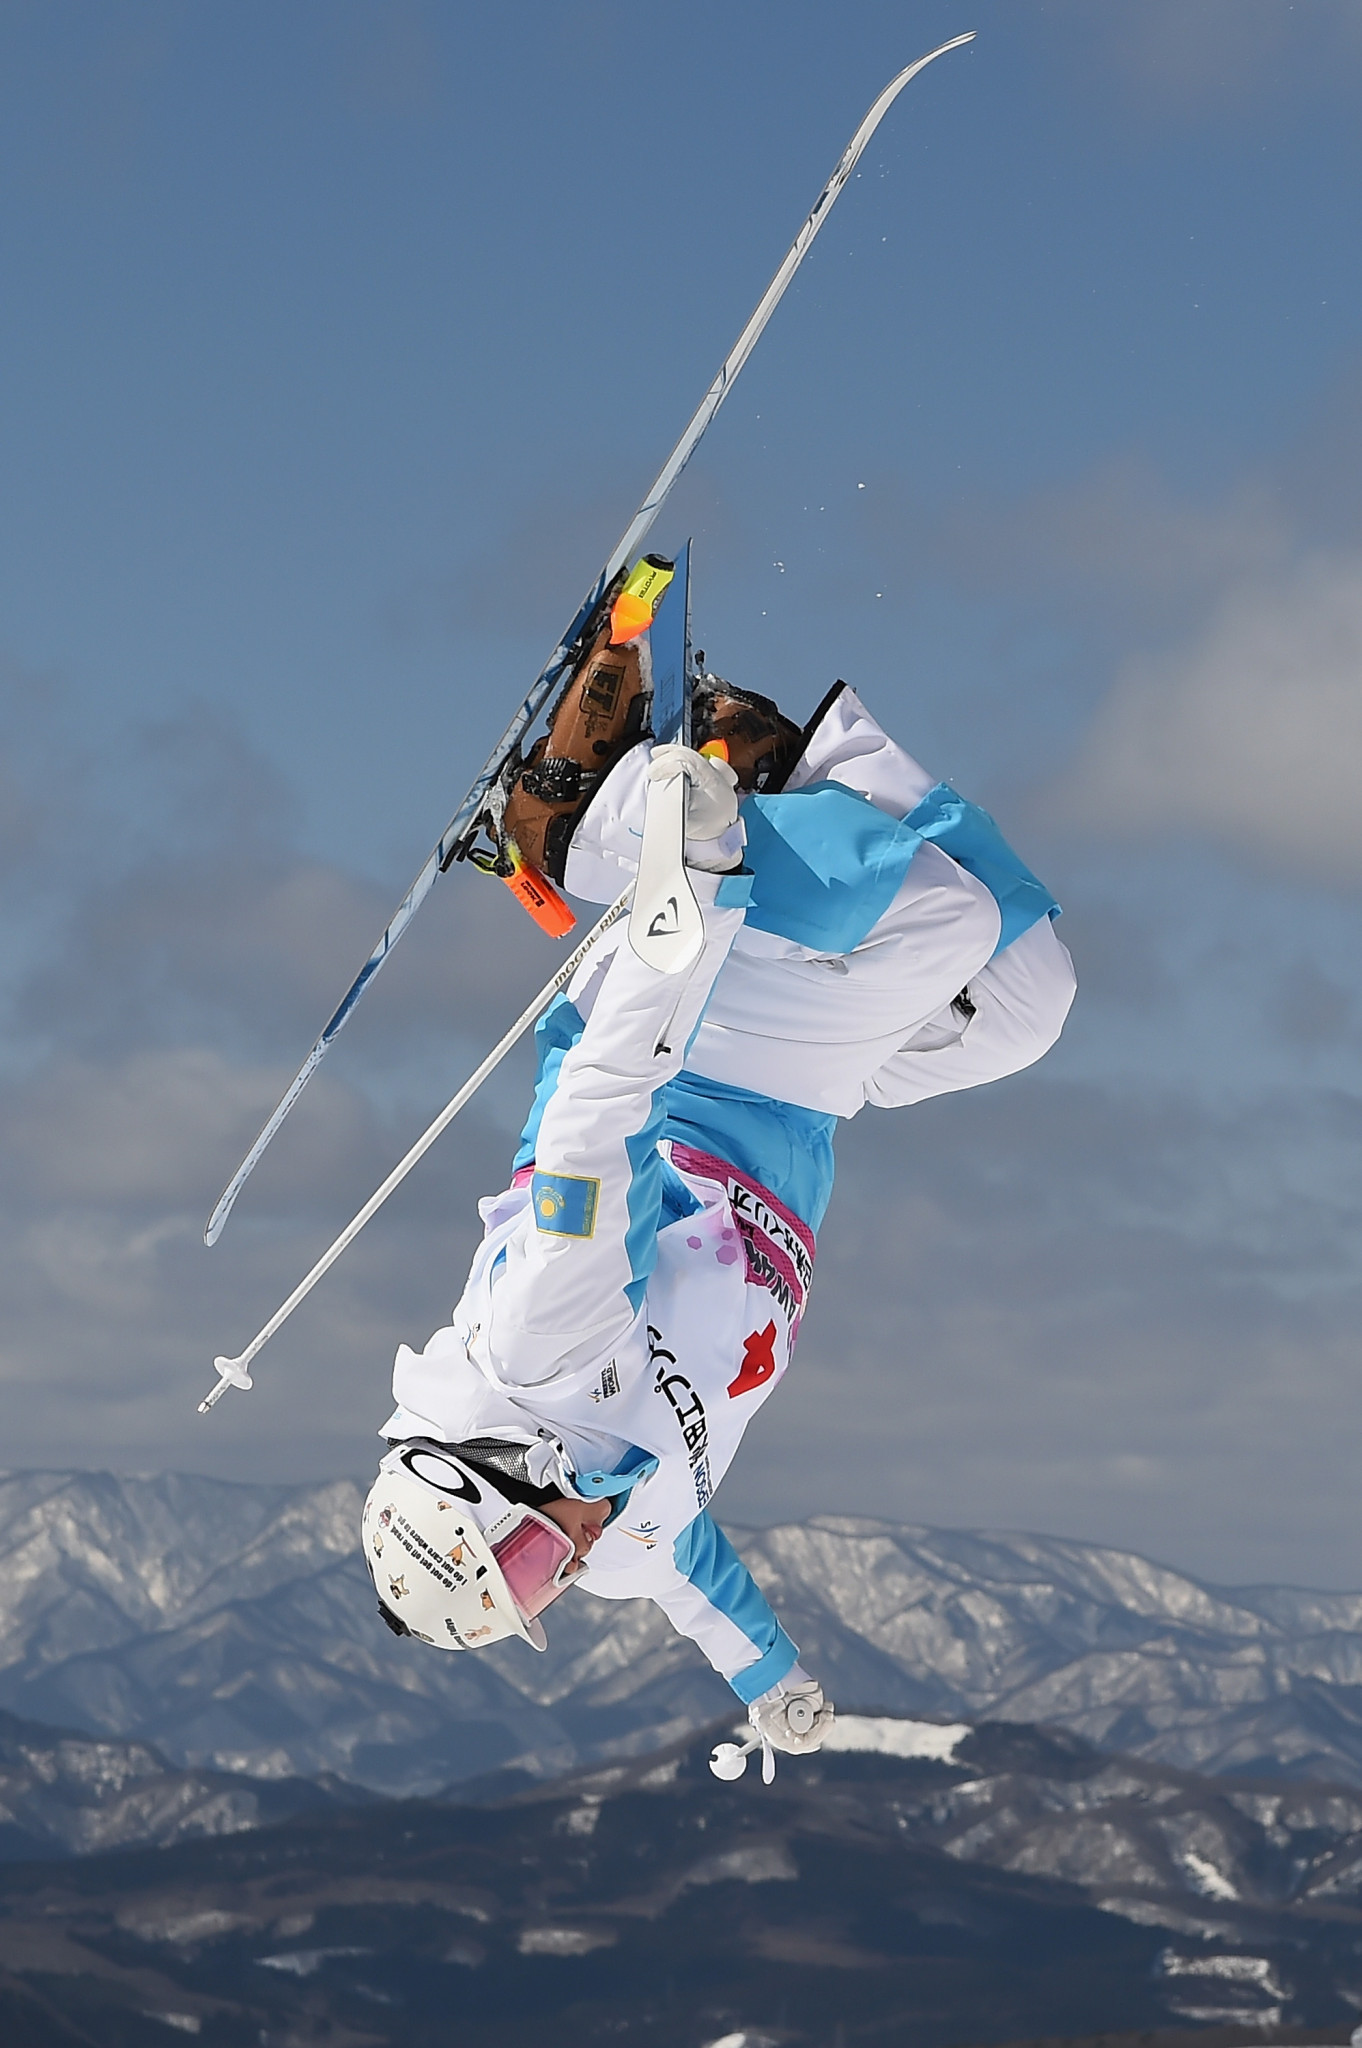 Home favourite Galysheva claims win at FIS Moguls World Cup in Kazakhstan